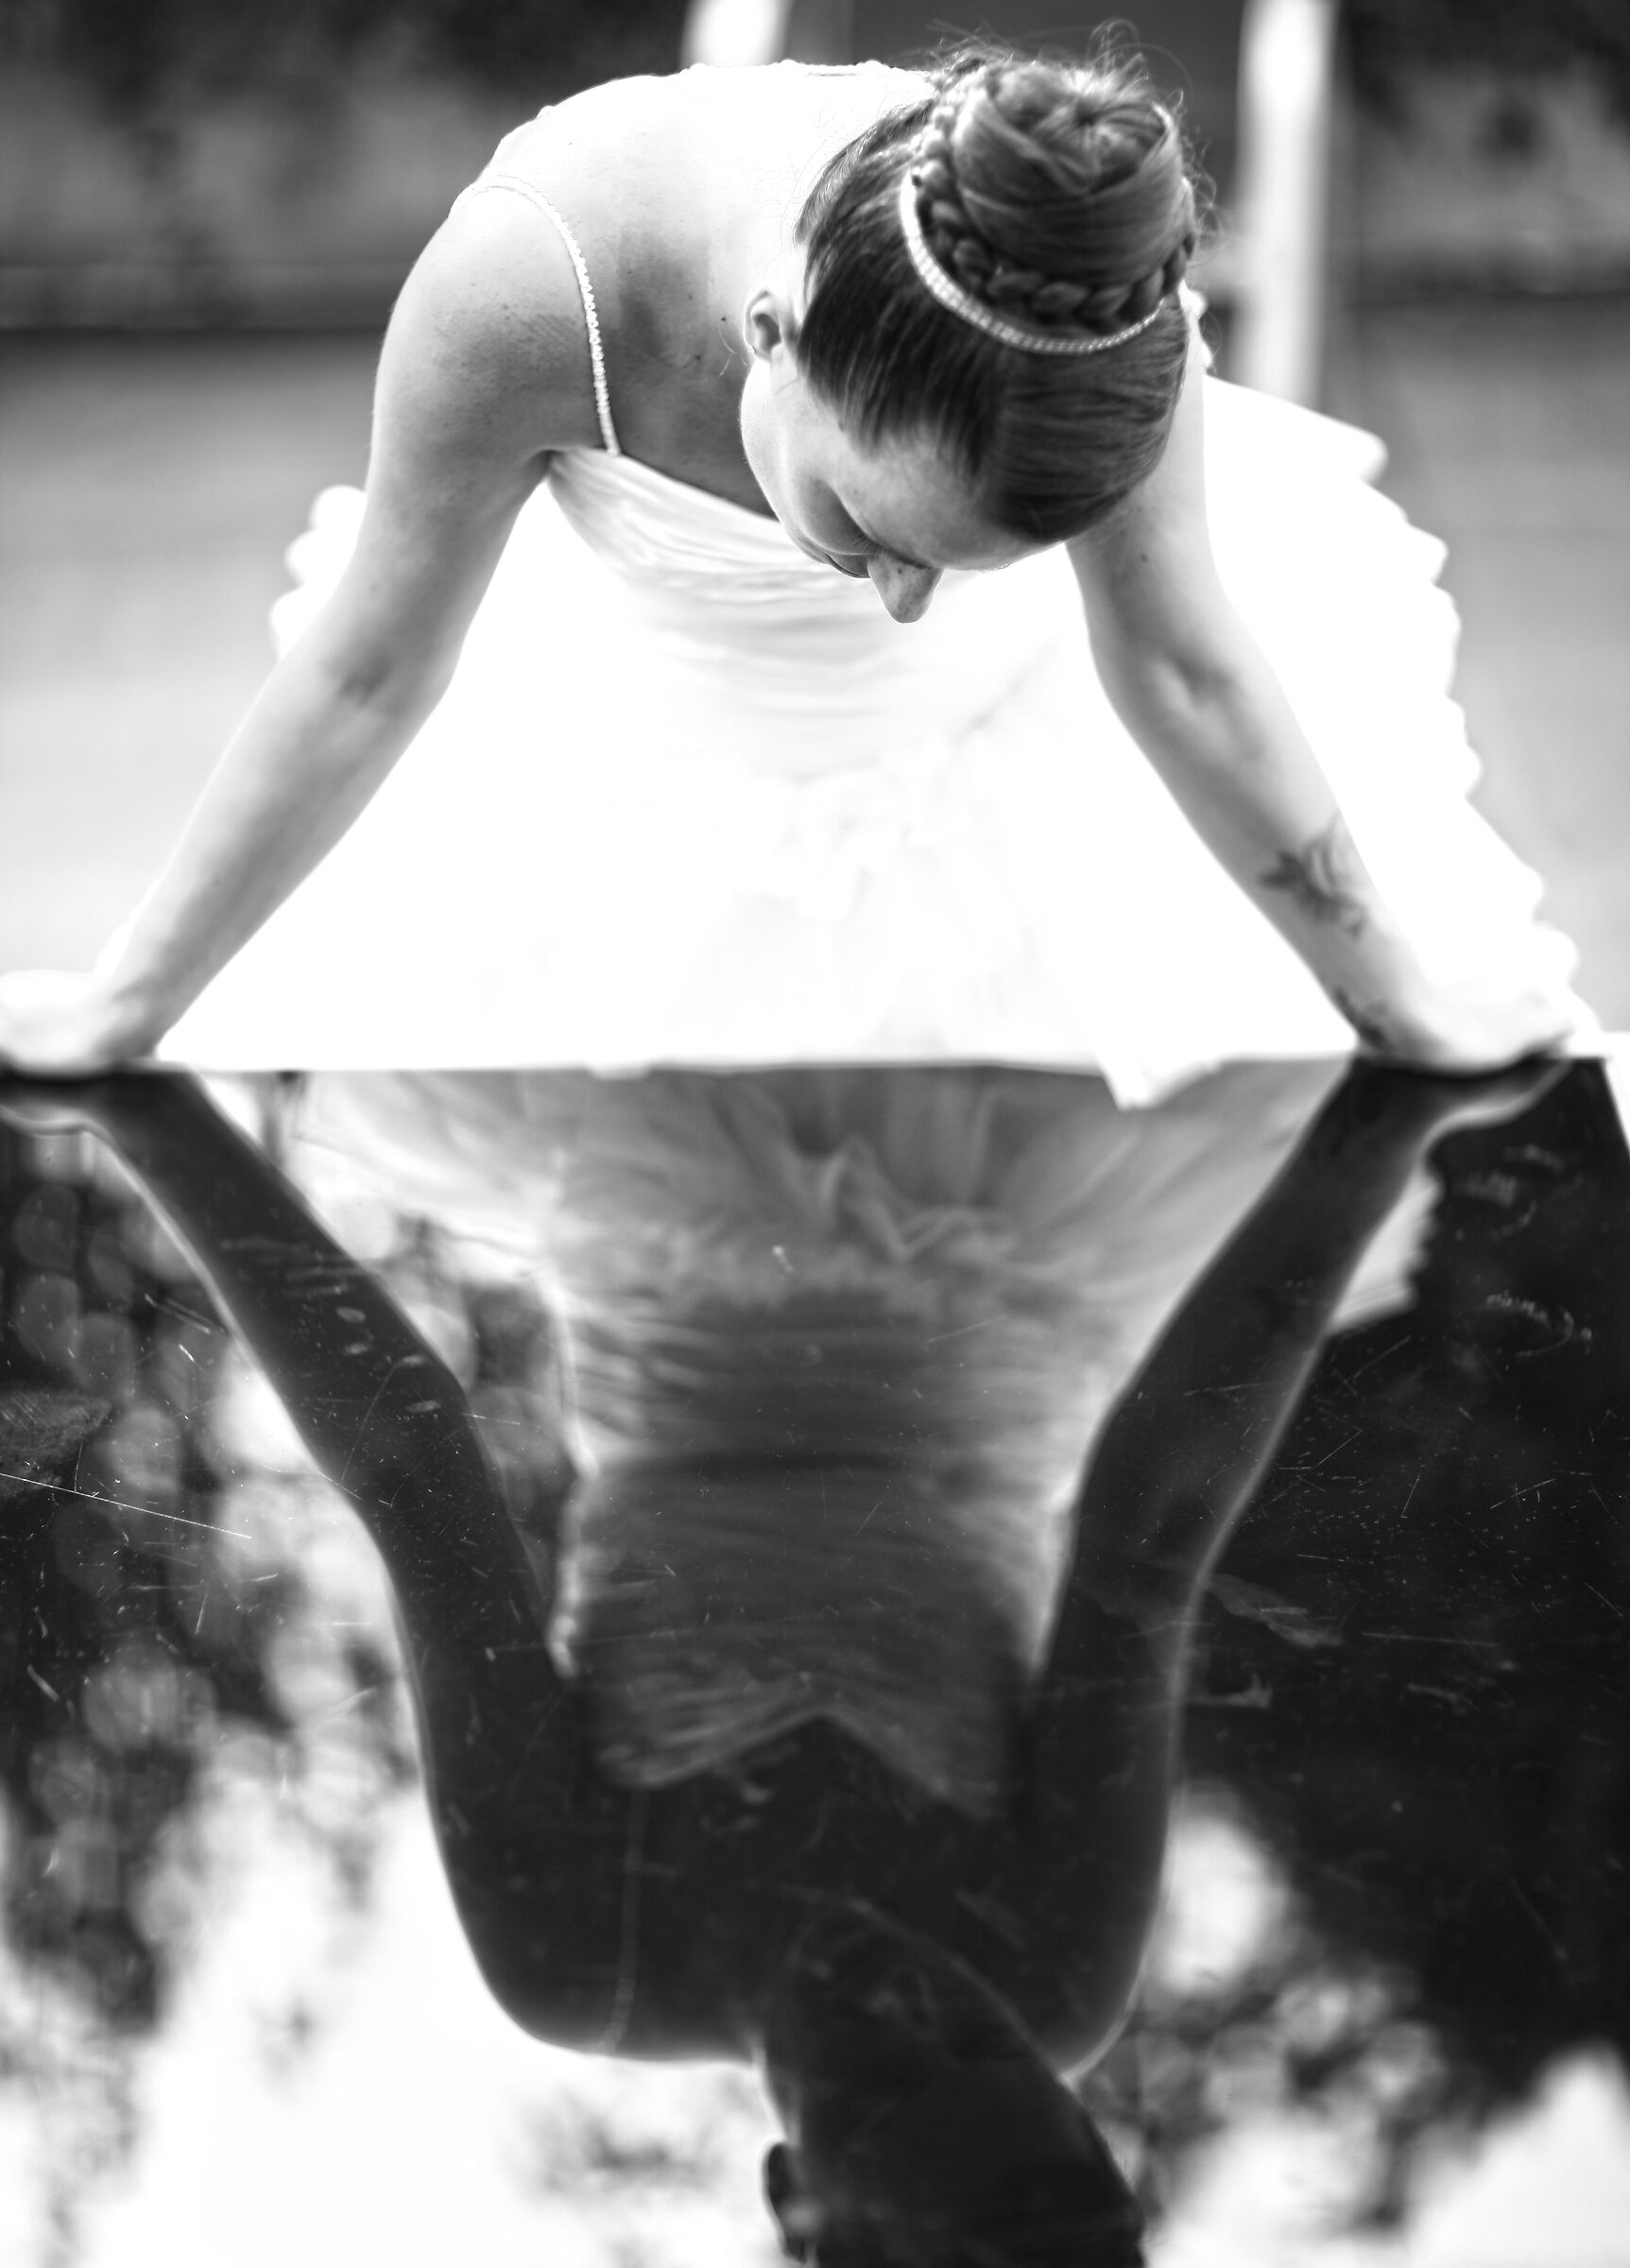 The reflection of the bride ...